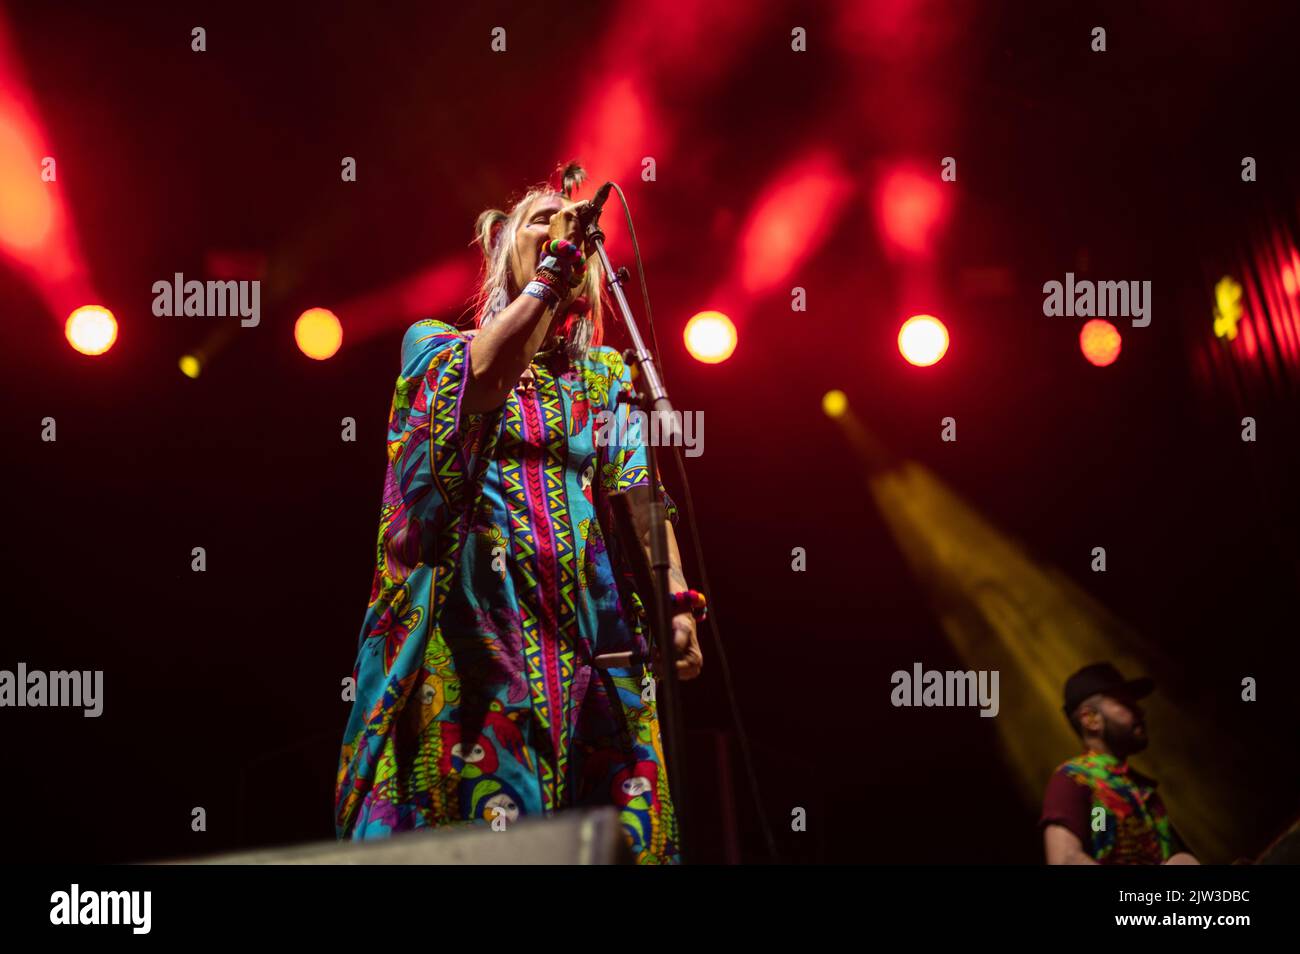 Colombian band Aterciopelados performs live during Vive Latino 2022 Festival in Zaragoza, Spain Stock Photo